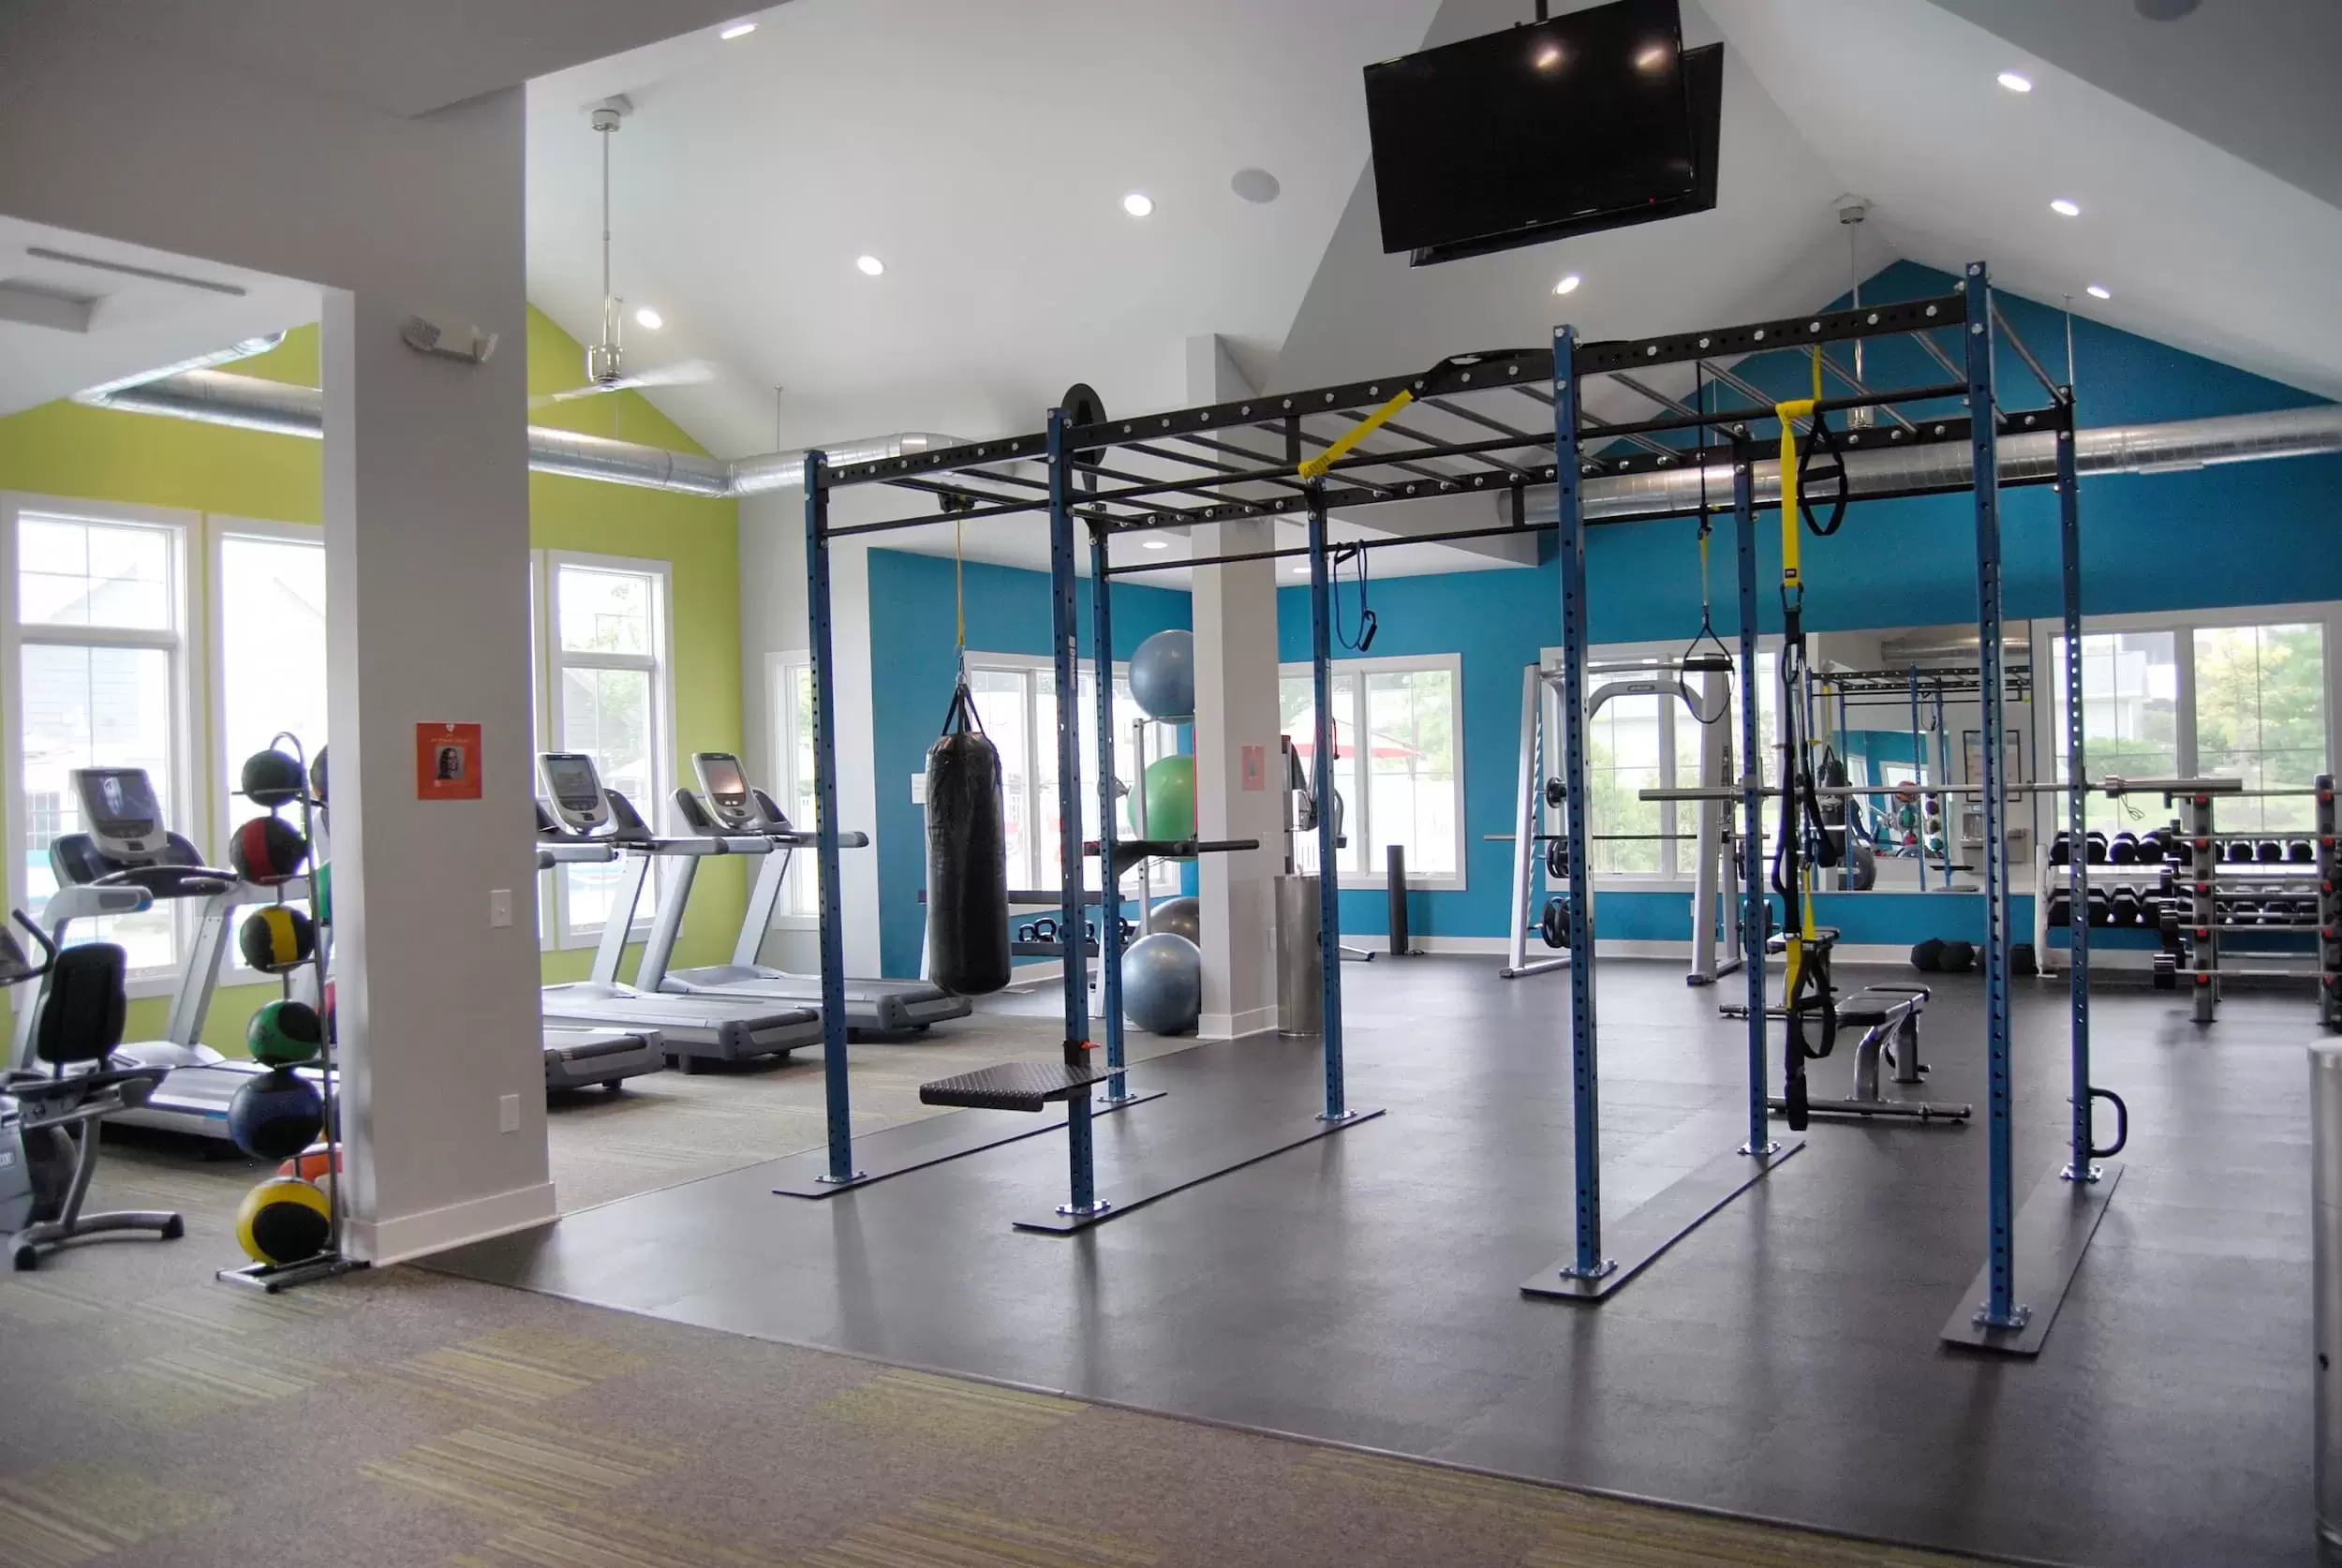 The fitness center, with exercise equipment and treadmills for healthy living.